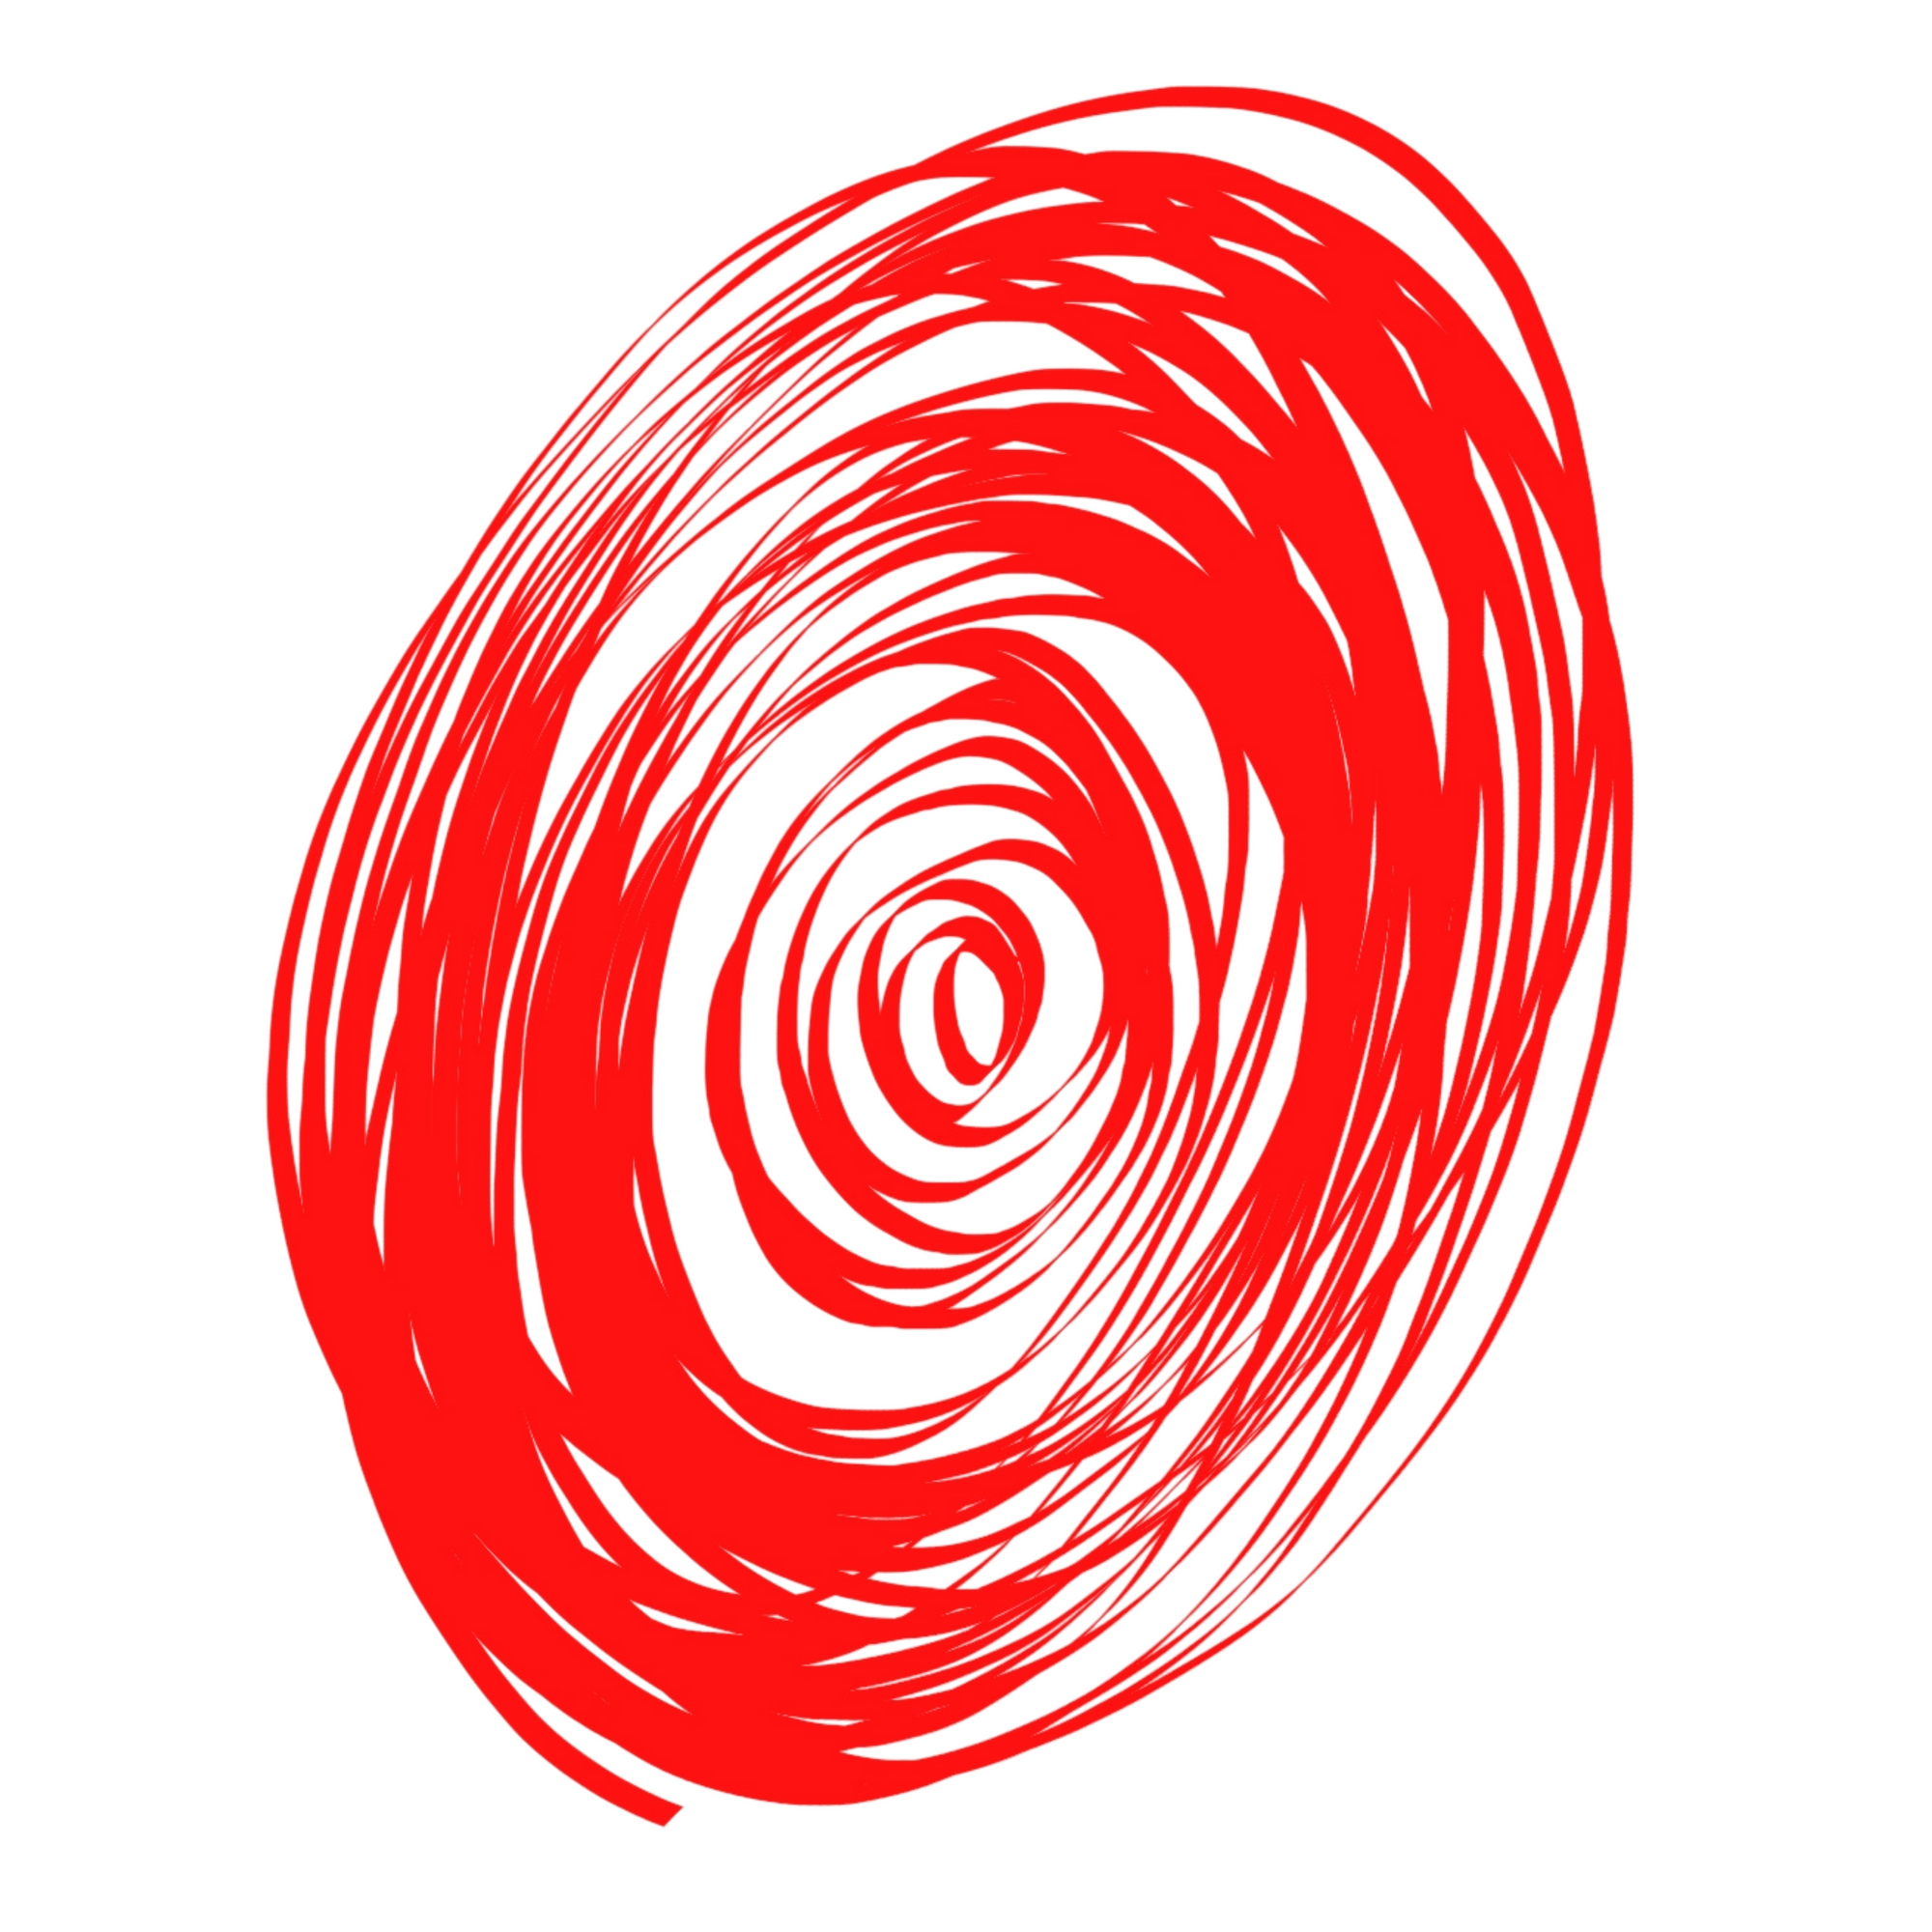 A doodle showing a jumble of concentric oval shapes in red against a white background